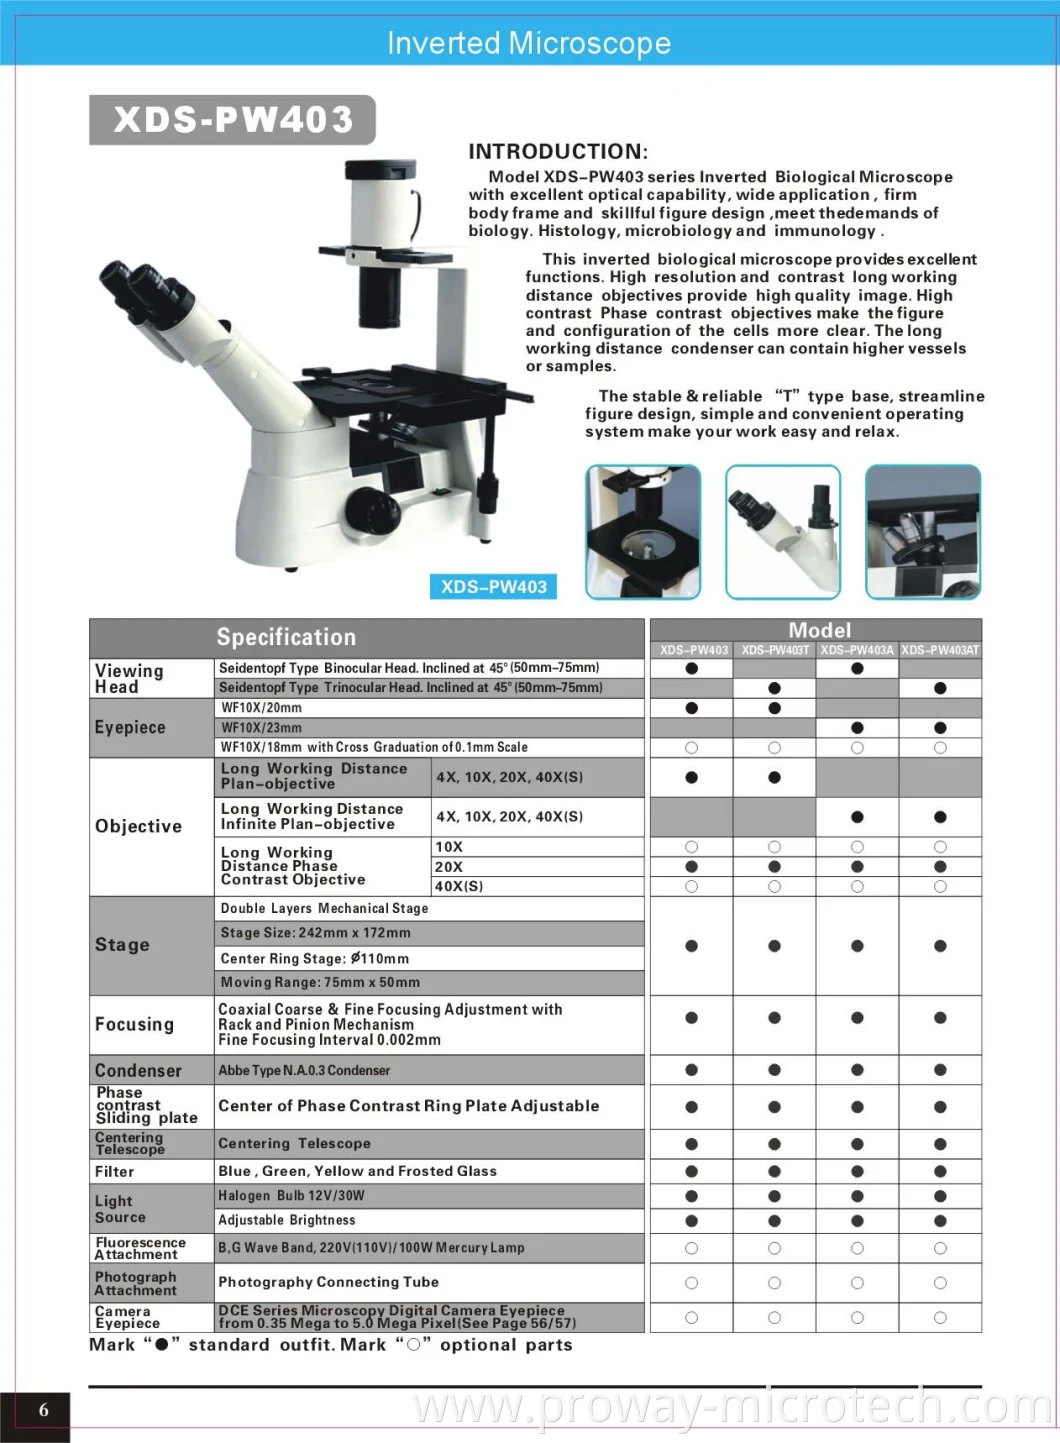 Professional Inverted Biological Microscope (XDS-PW403)